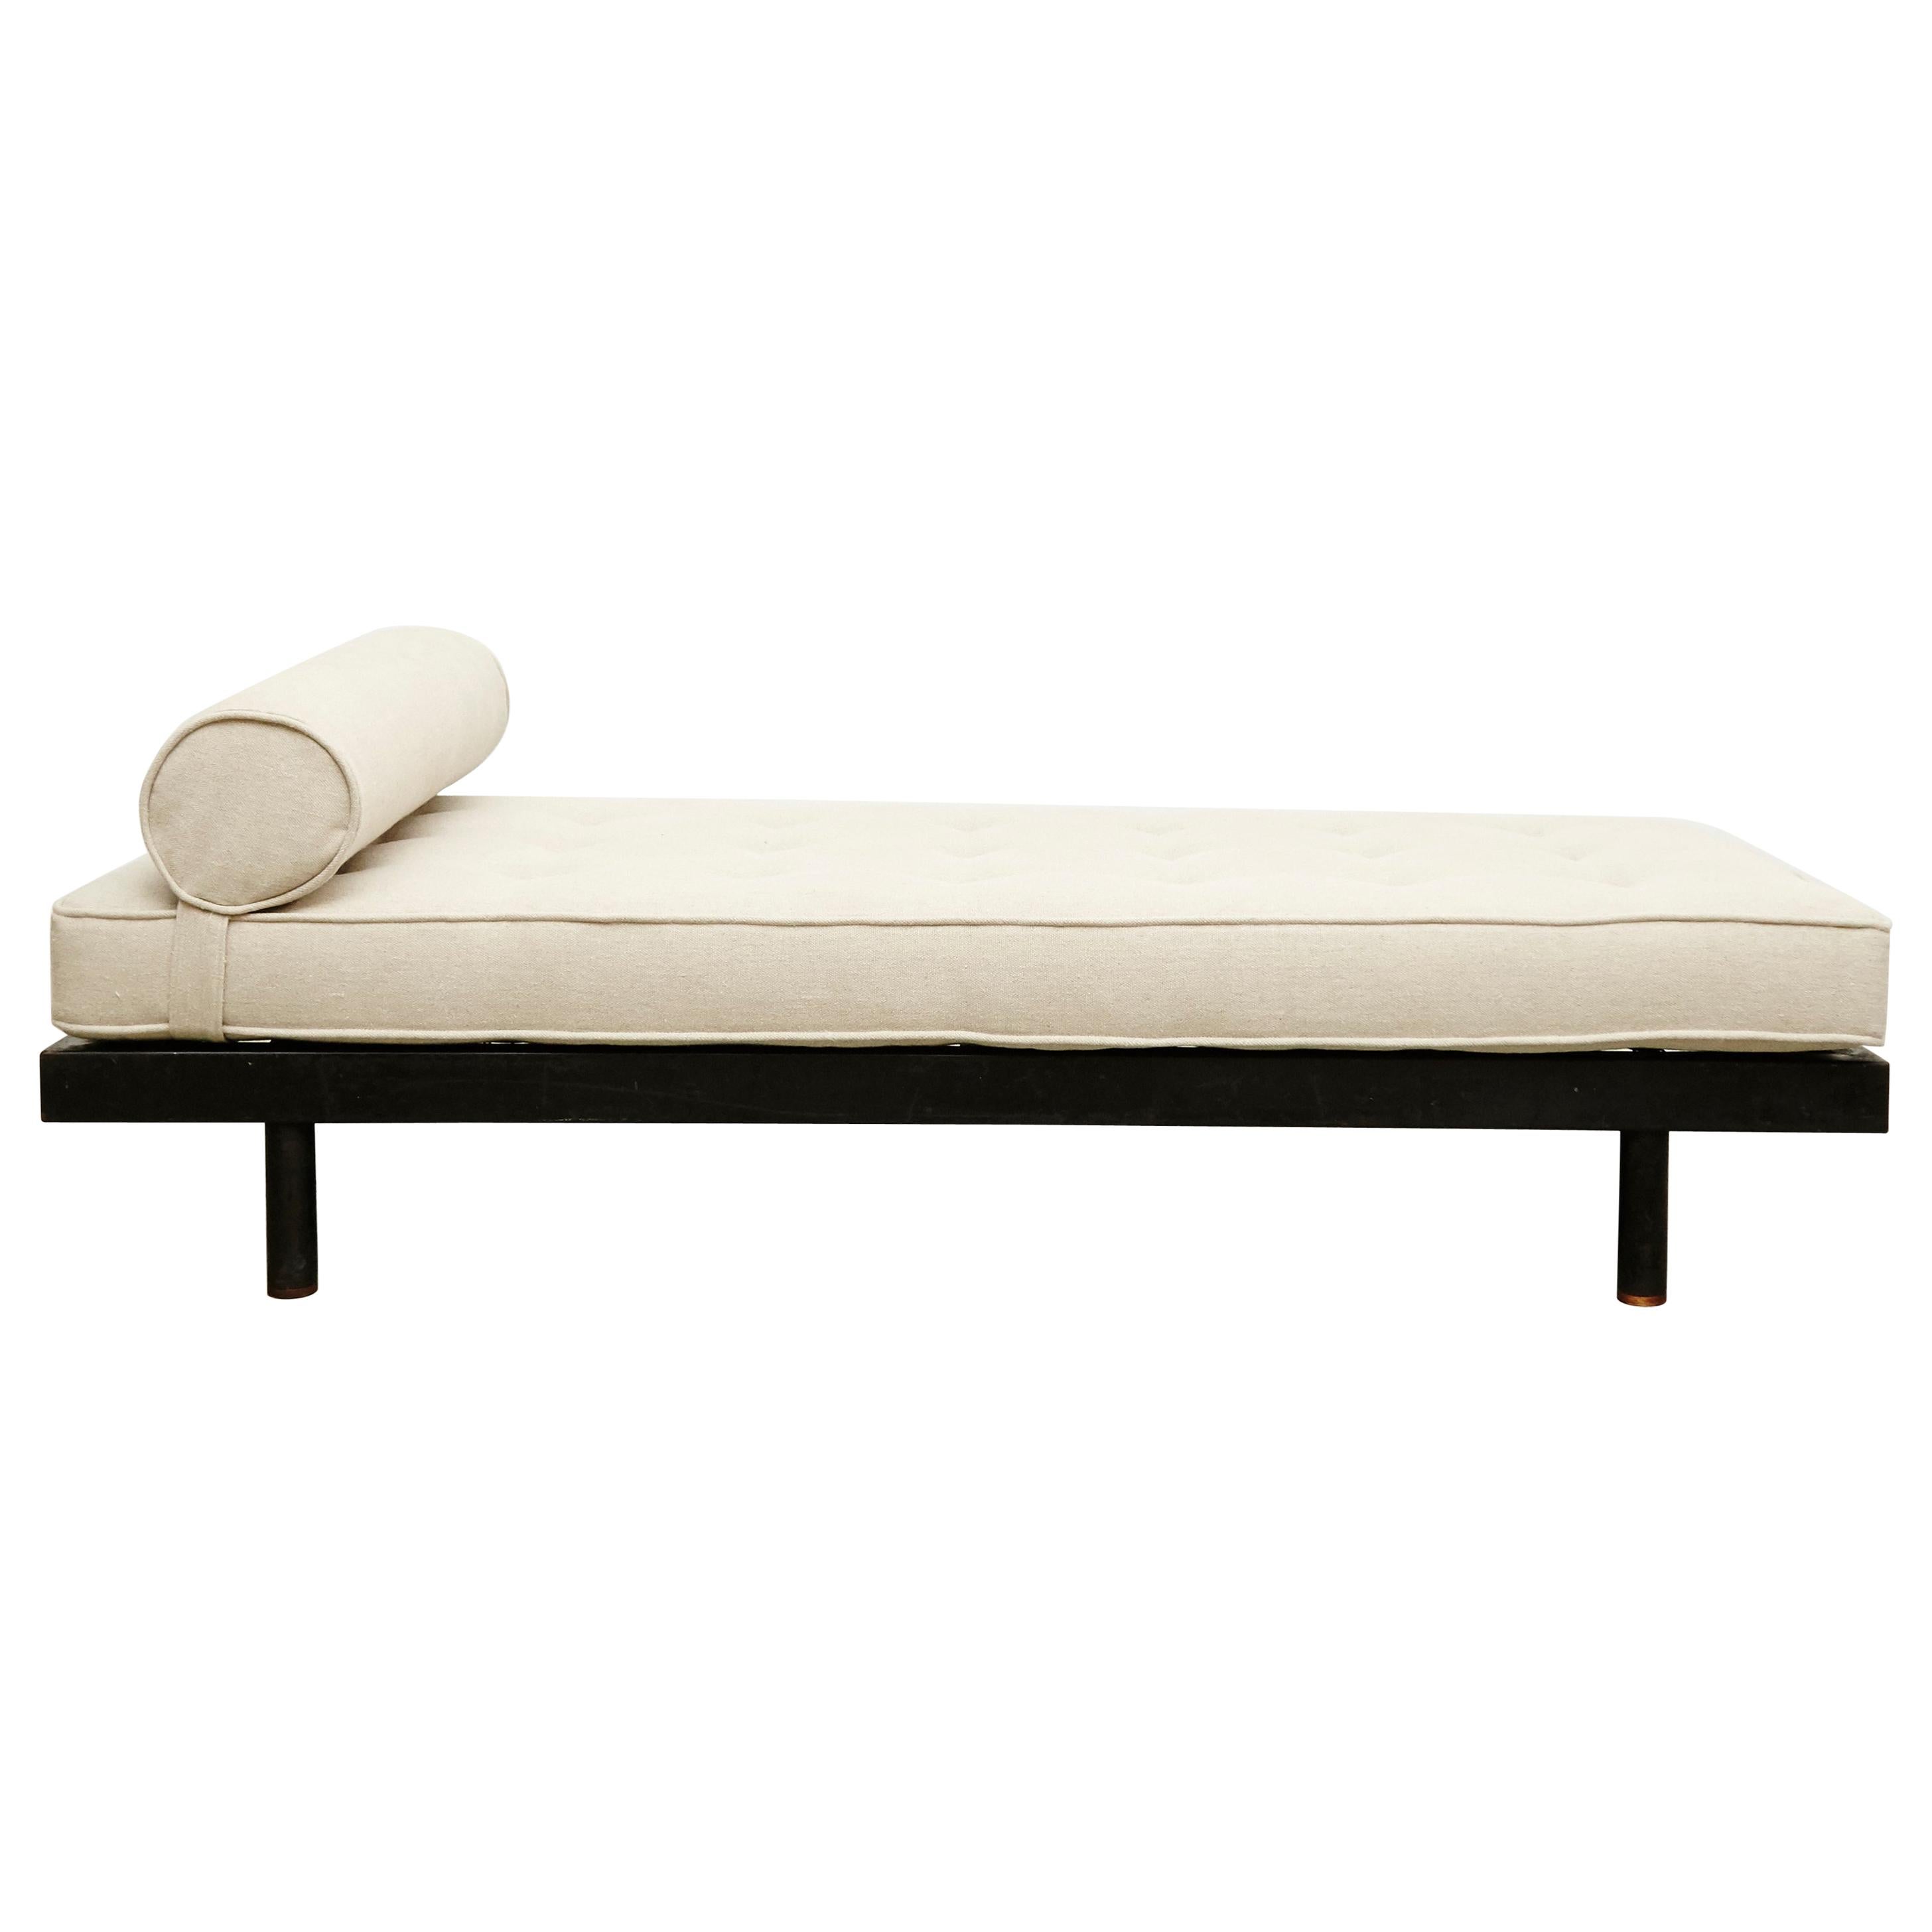 Jean Prouve Daybed in Black Metal, circa 1950